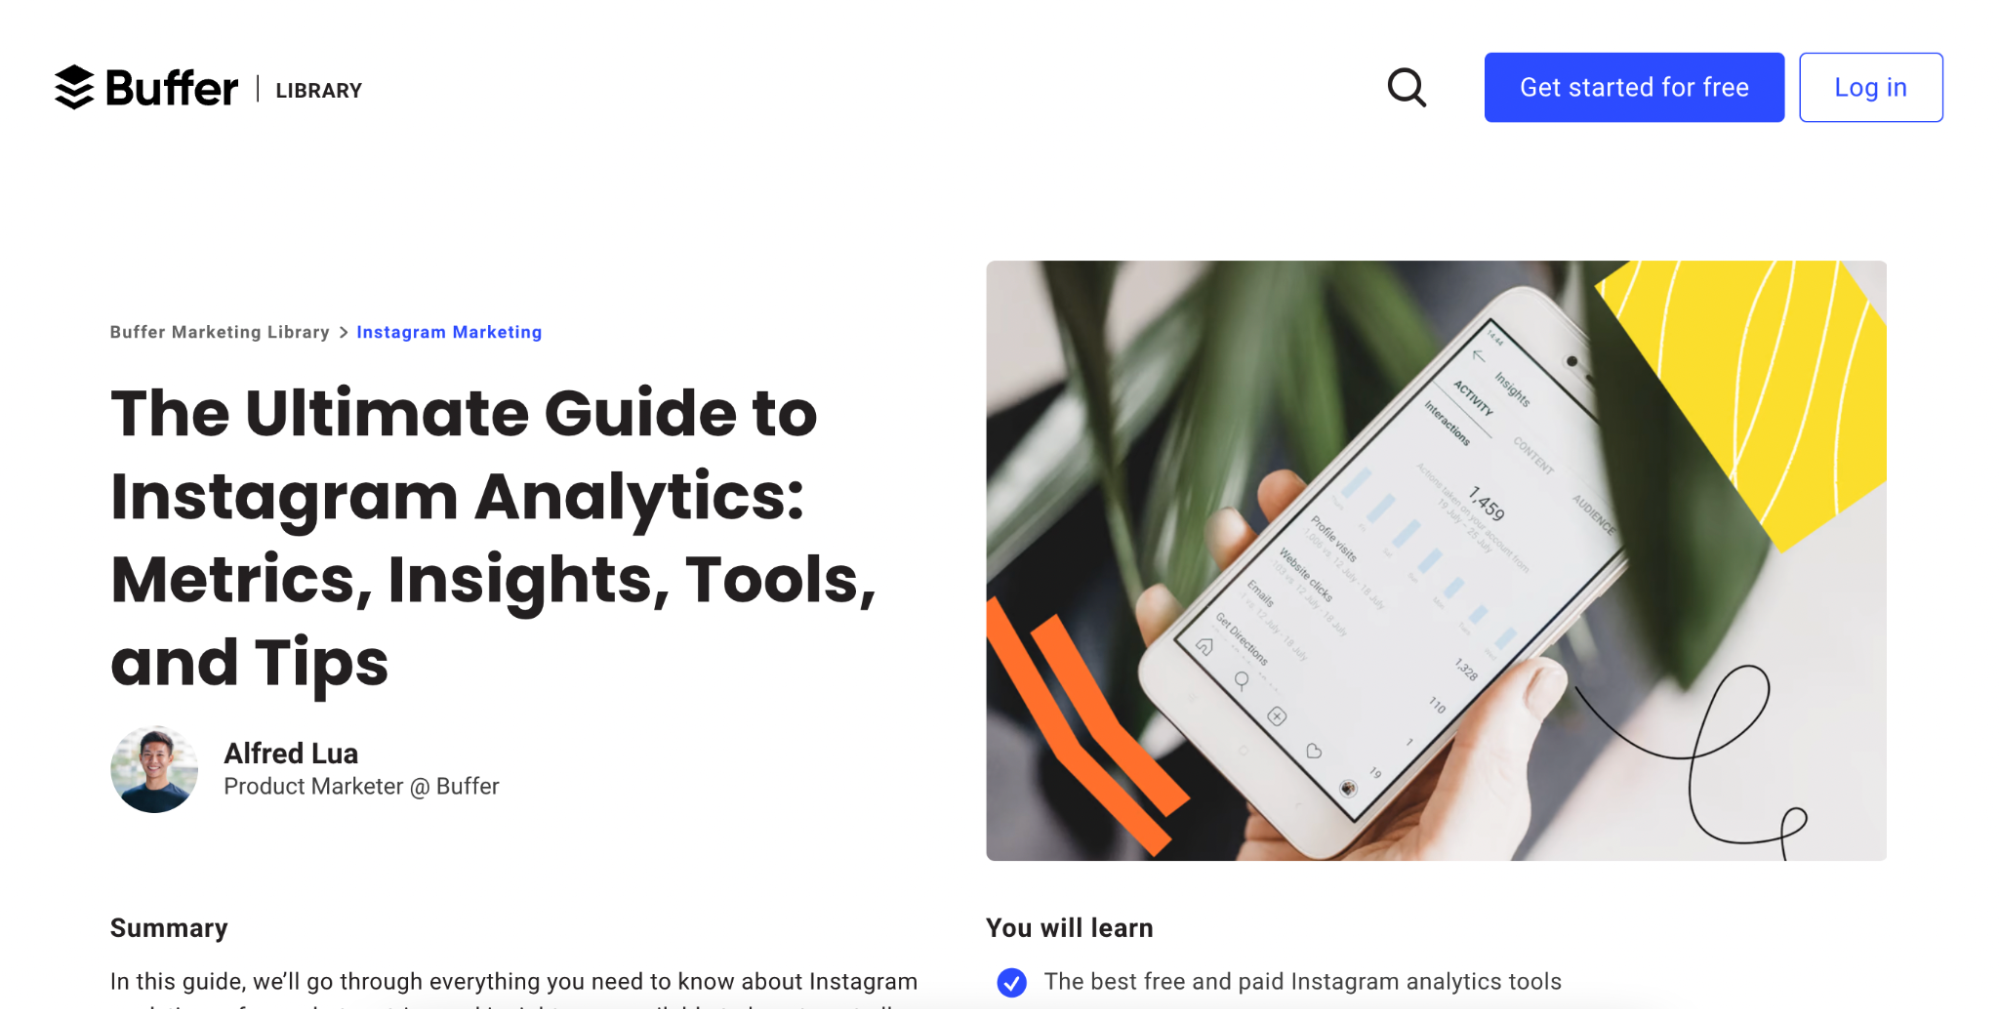 Buffer - The Ultimate Guide to Instagram Analytics